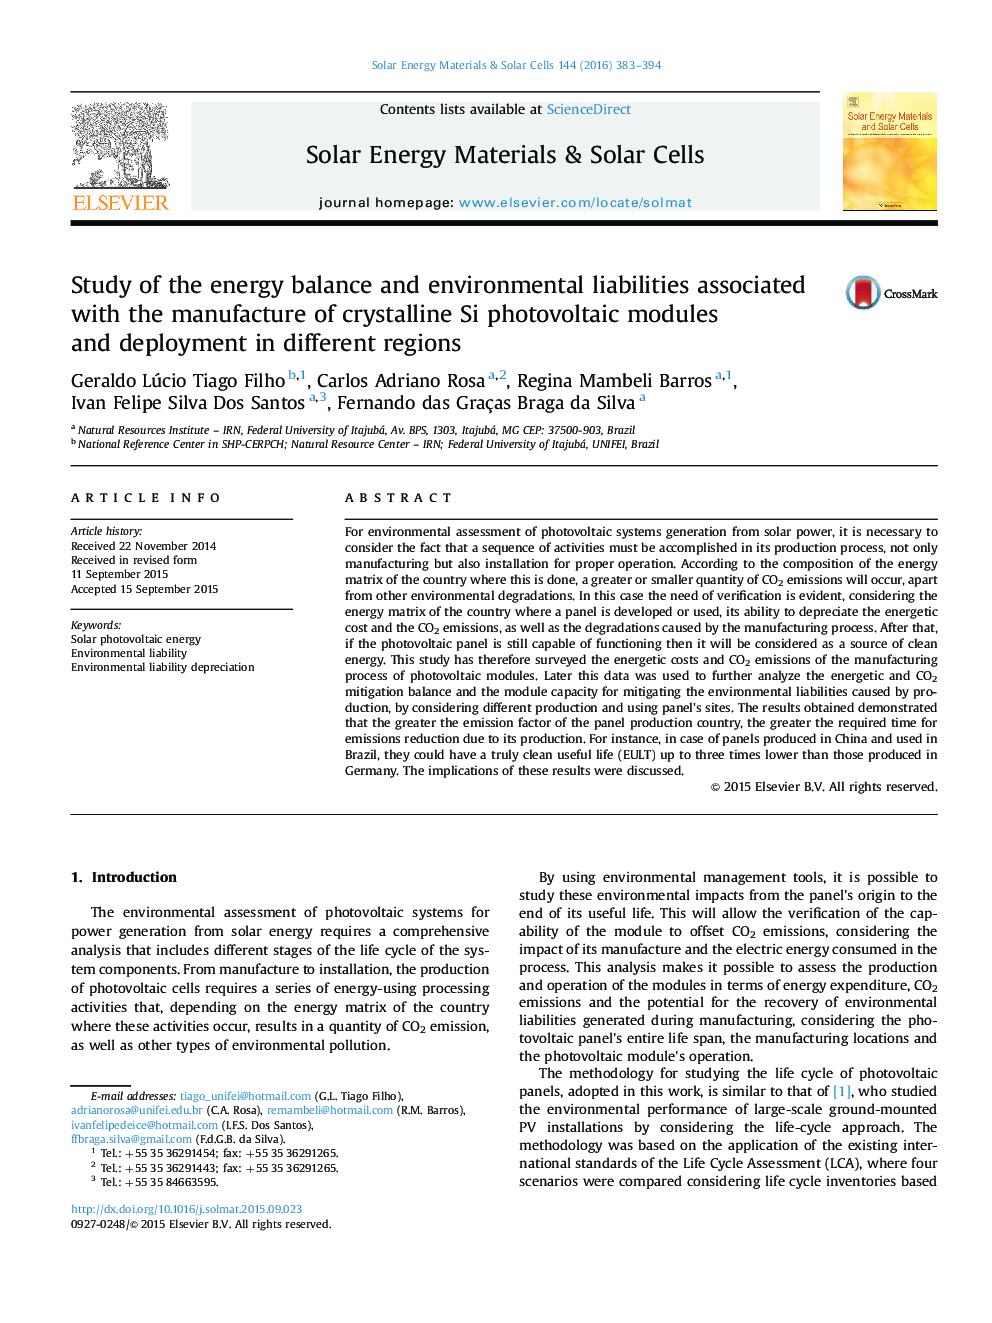 Study of the energy balance and environmental liabilities associated with the manufacture of crystalline Si photovoltaic modules and deployment in different regions